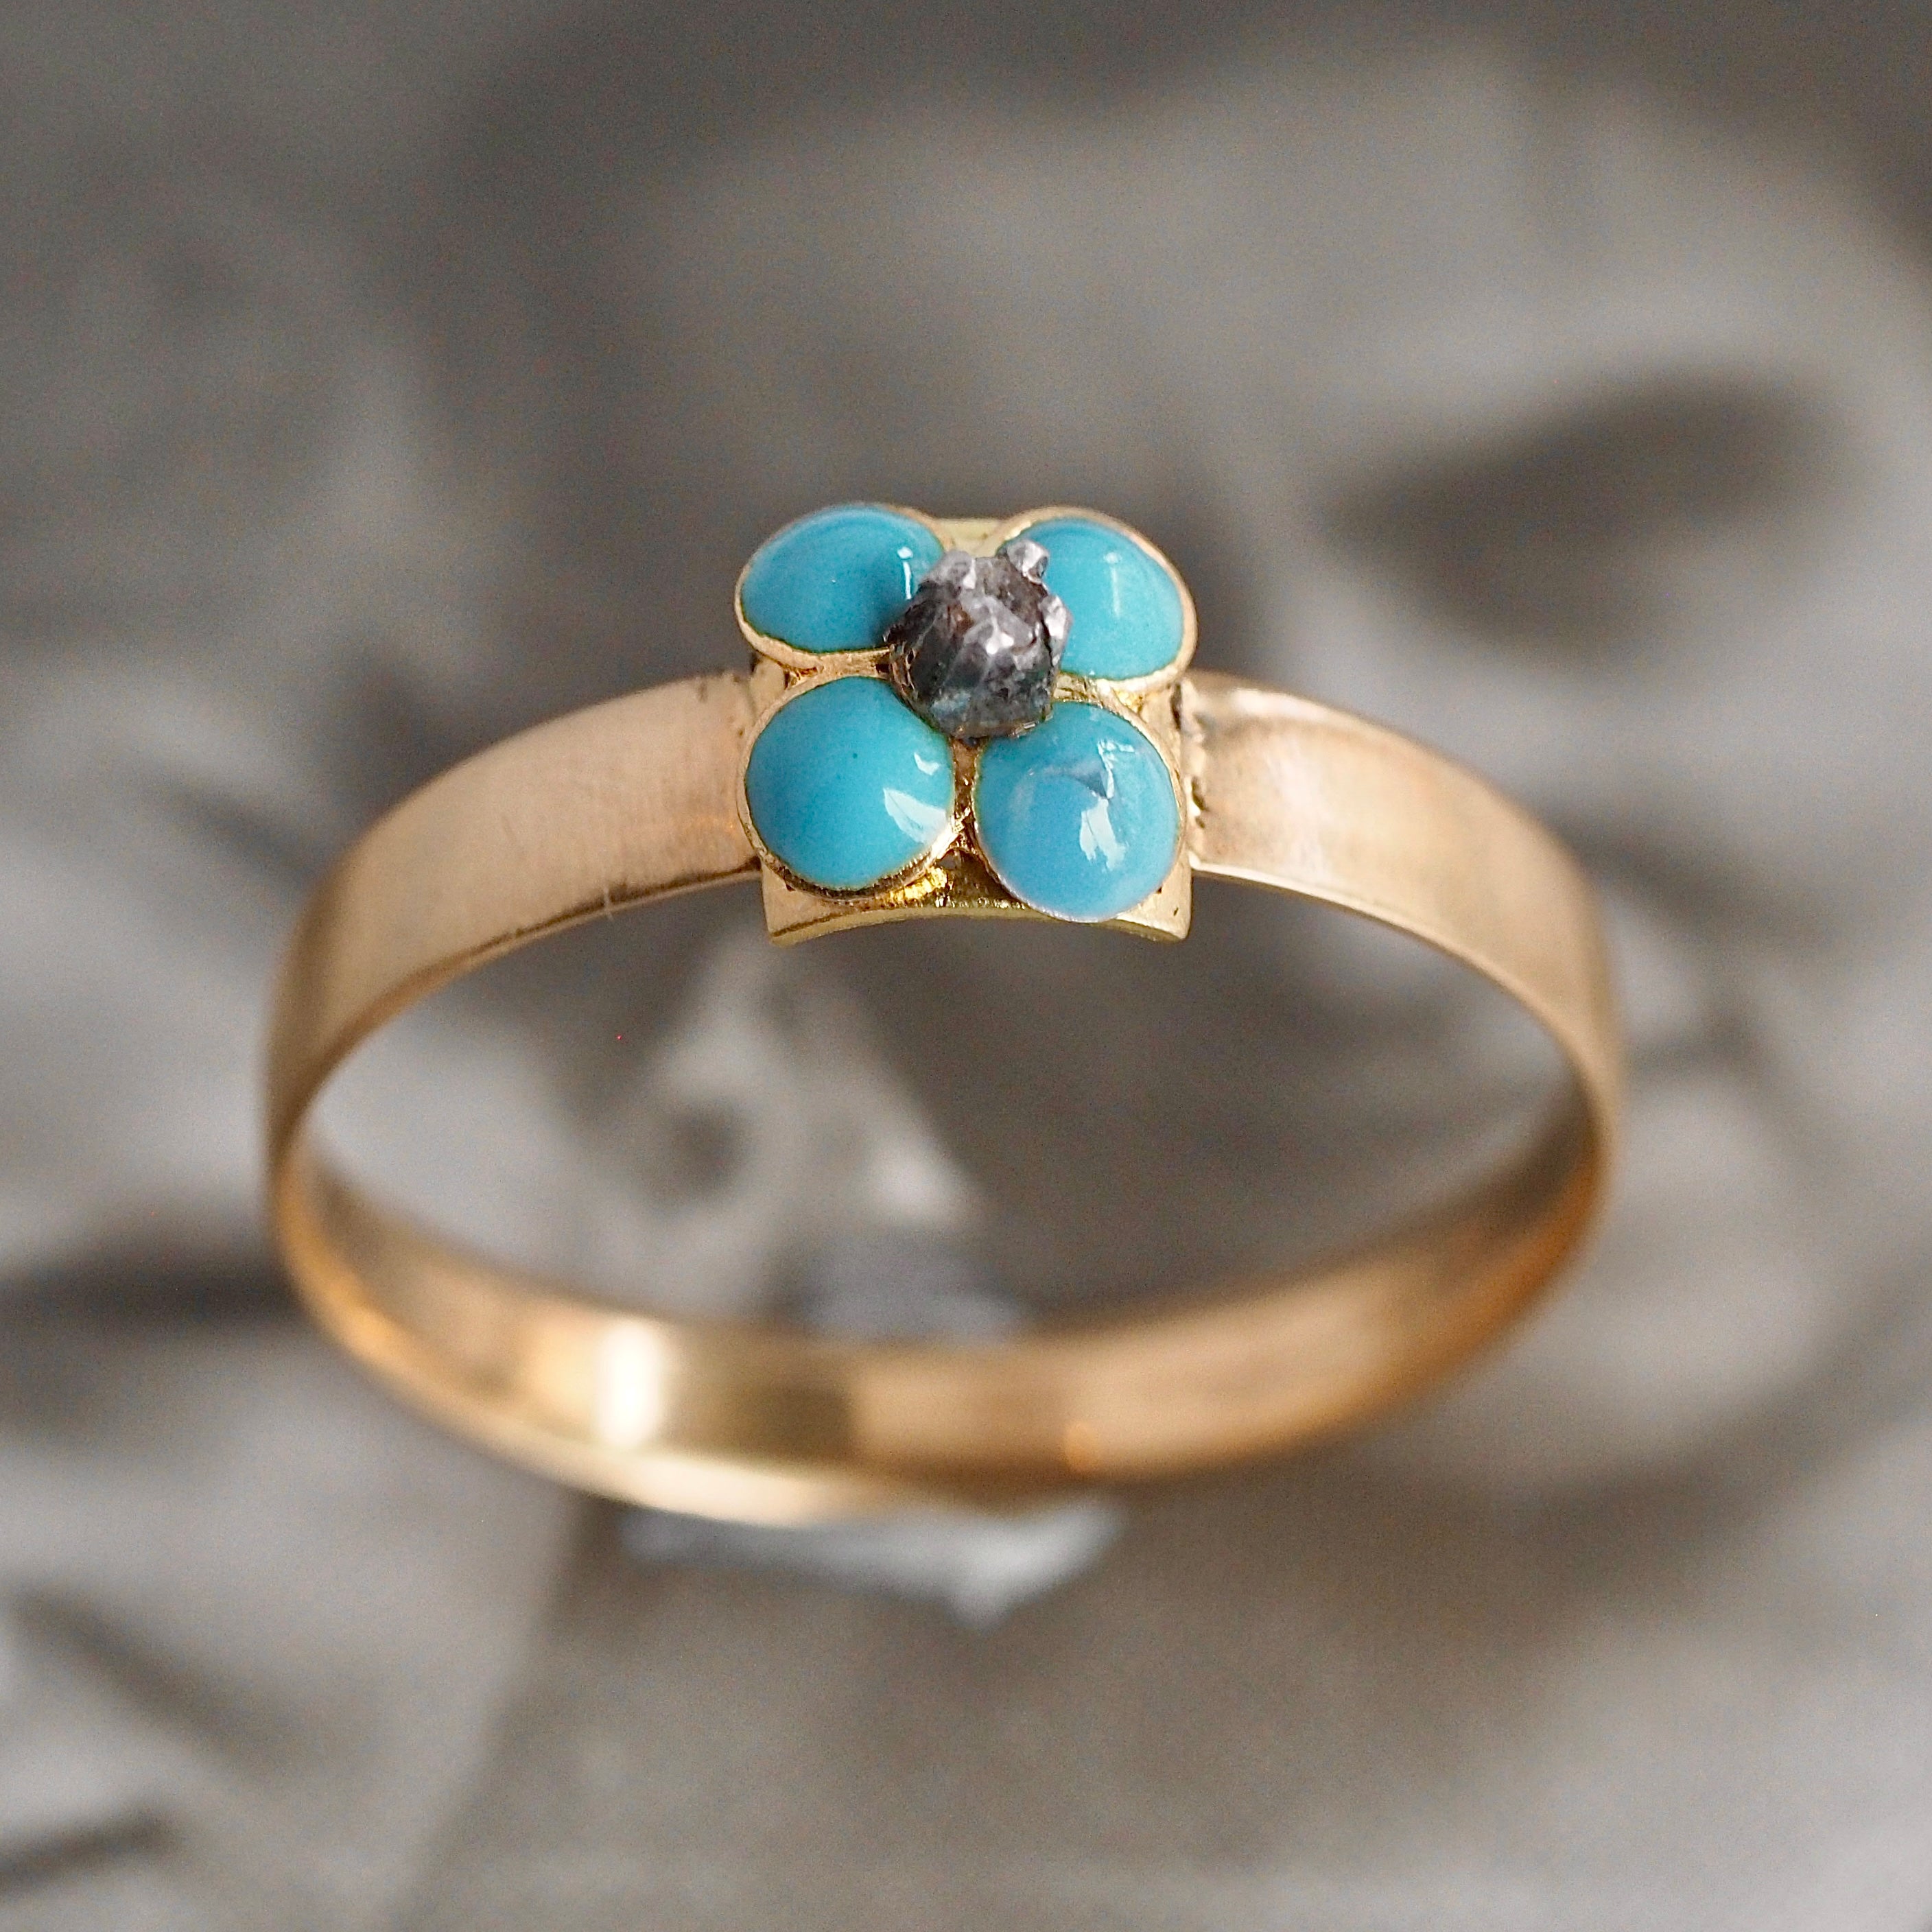 Antique Victorian c. 1889 18k Gold Diamond and Enamel Forget Me Not Ring